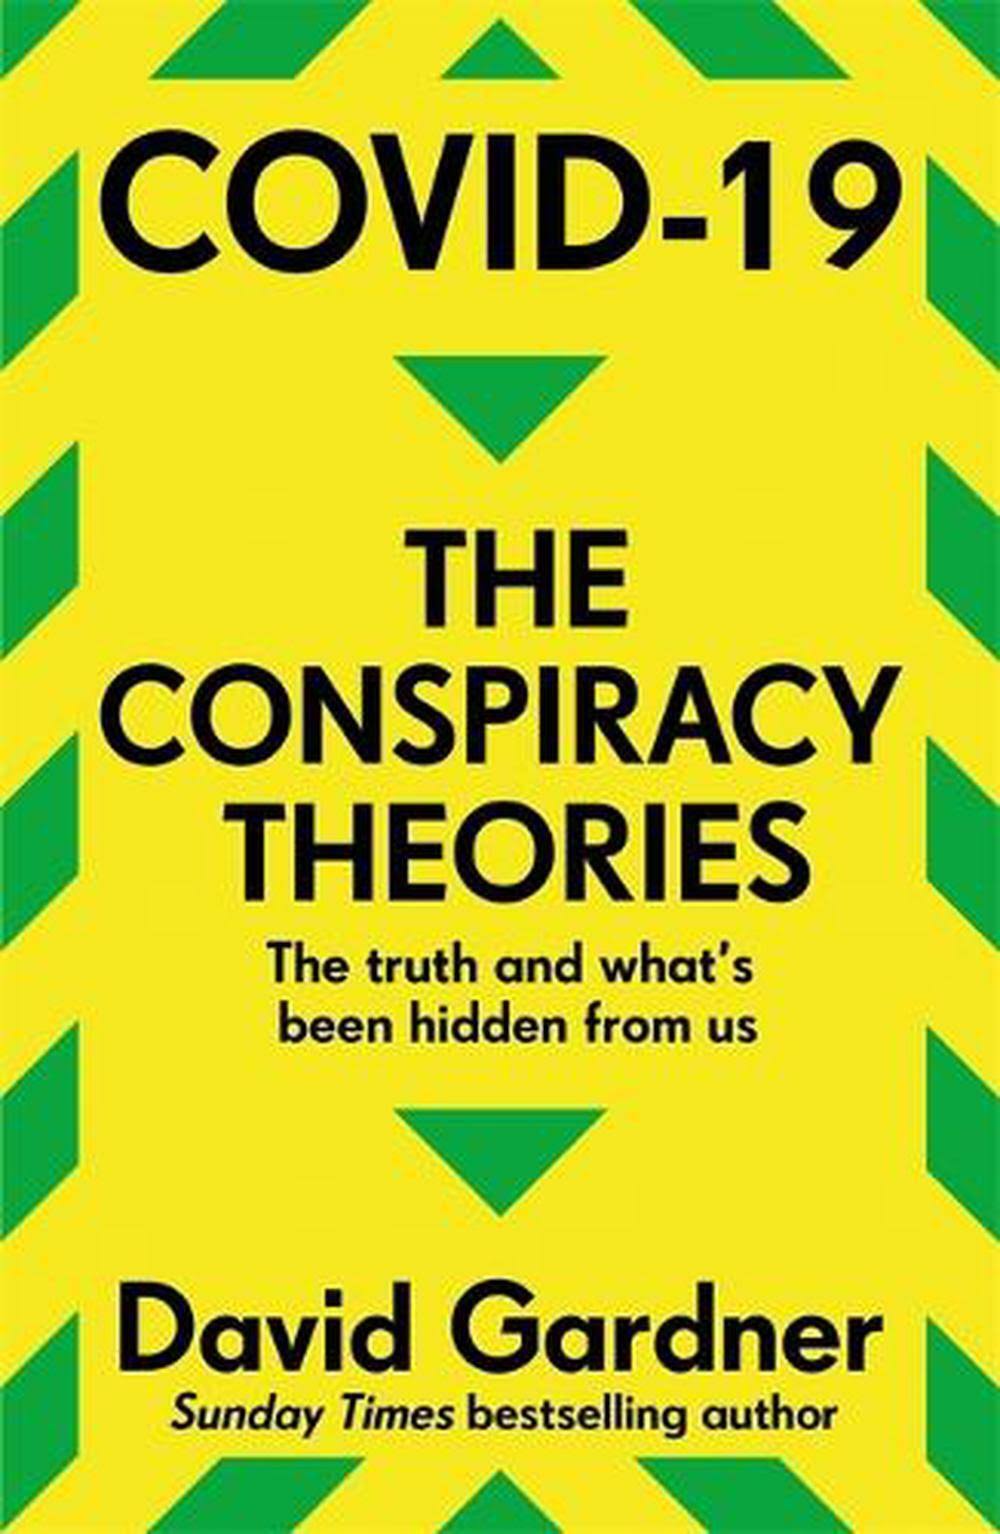 COVID-19 the Conspiracy Theories [Book]